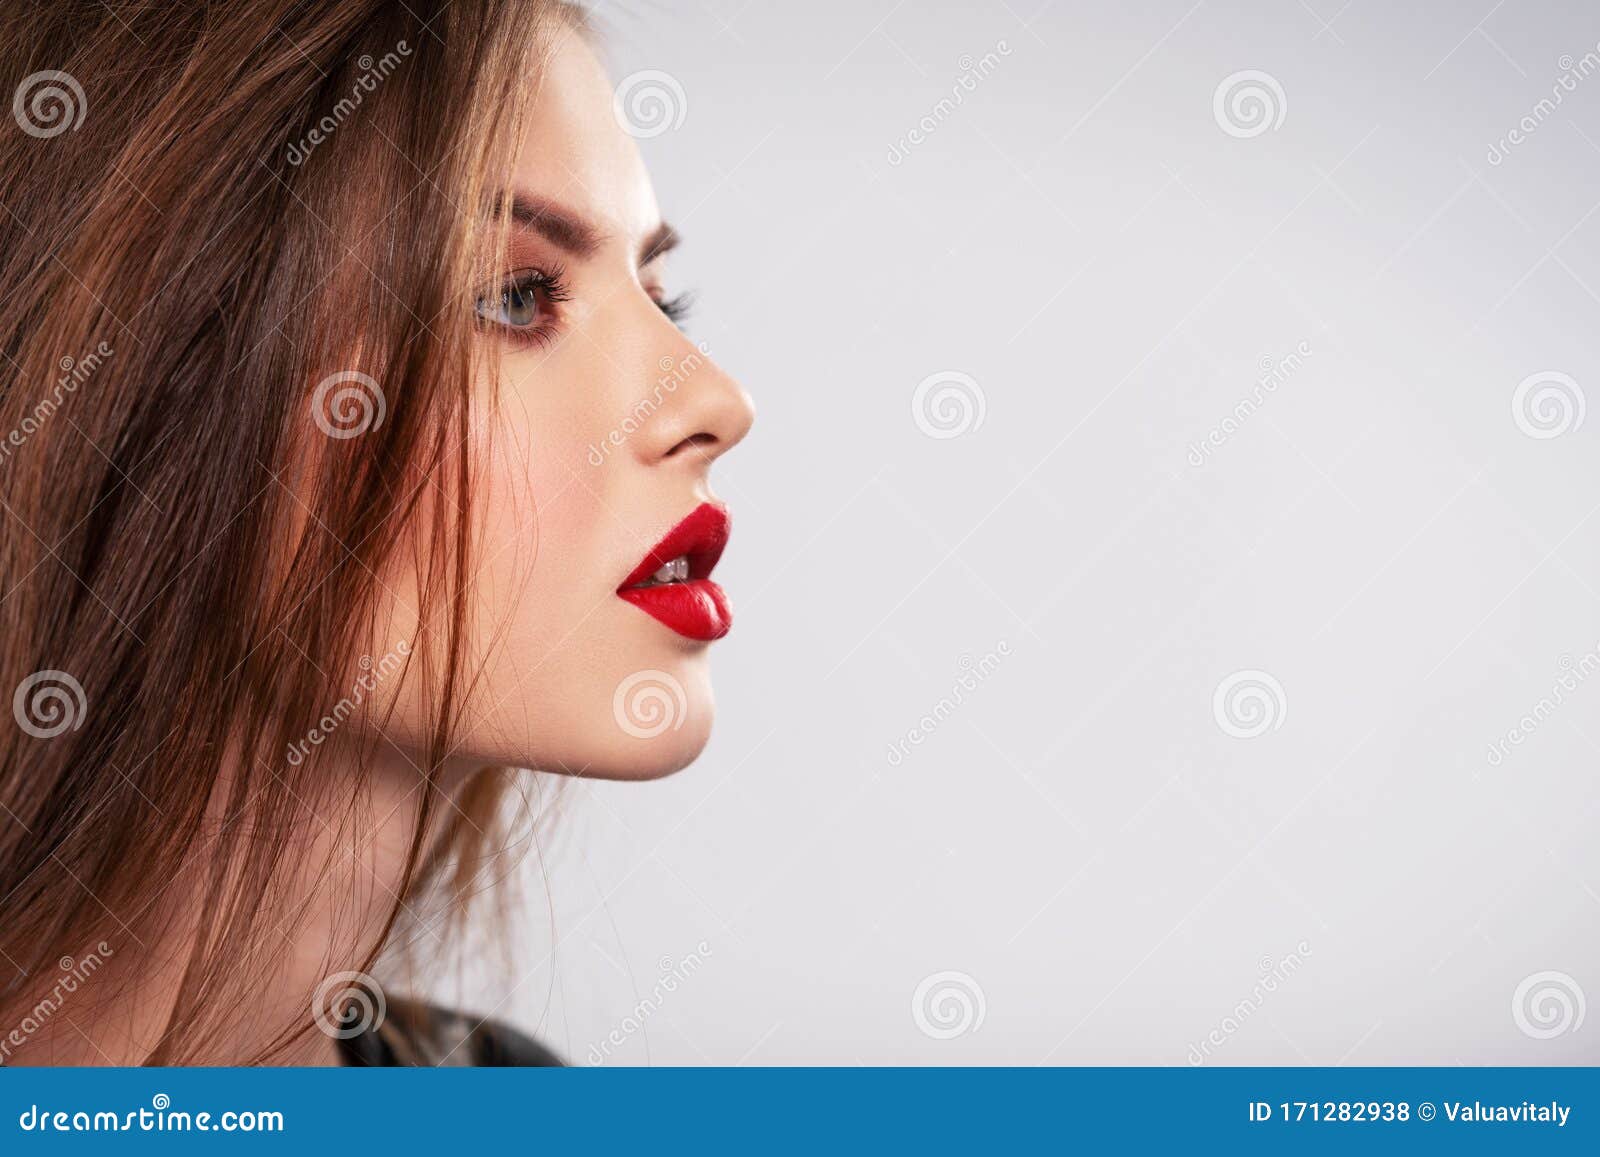 145,855 Pretty Girl Profile Images, Stock Photos, 3D objects, & Vectors